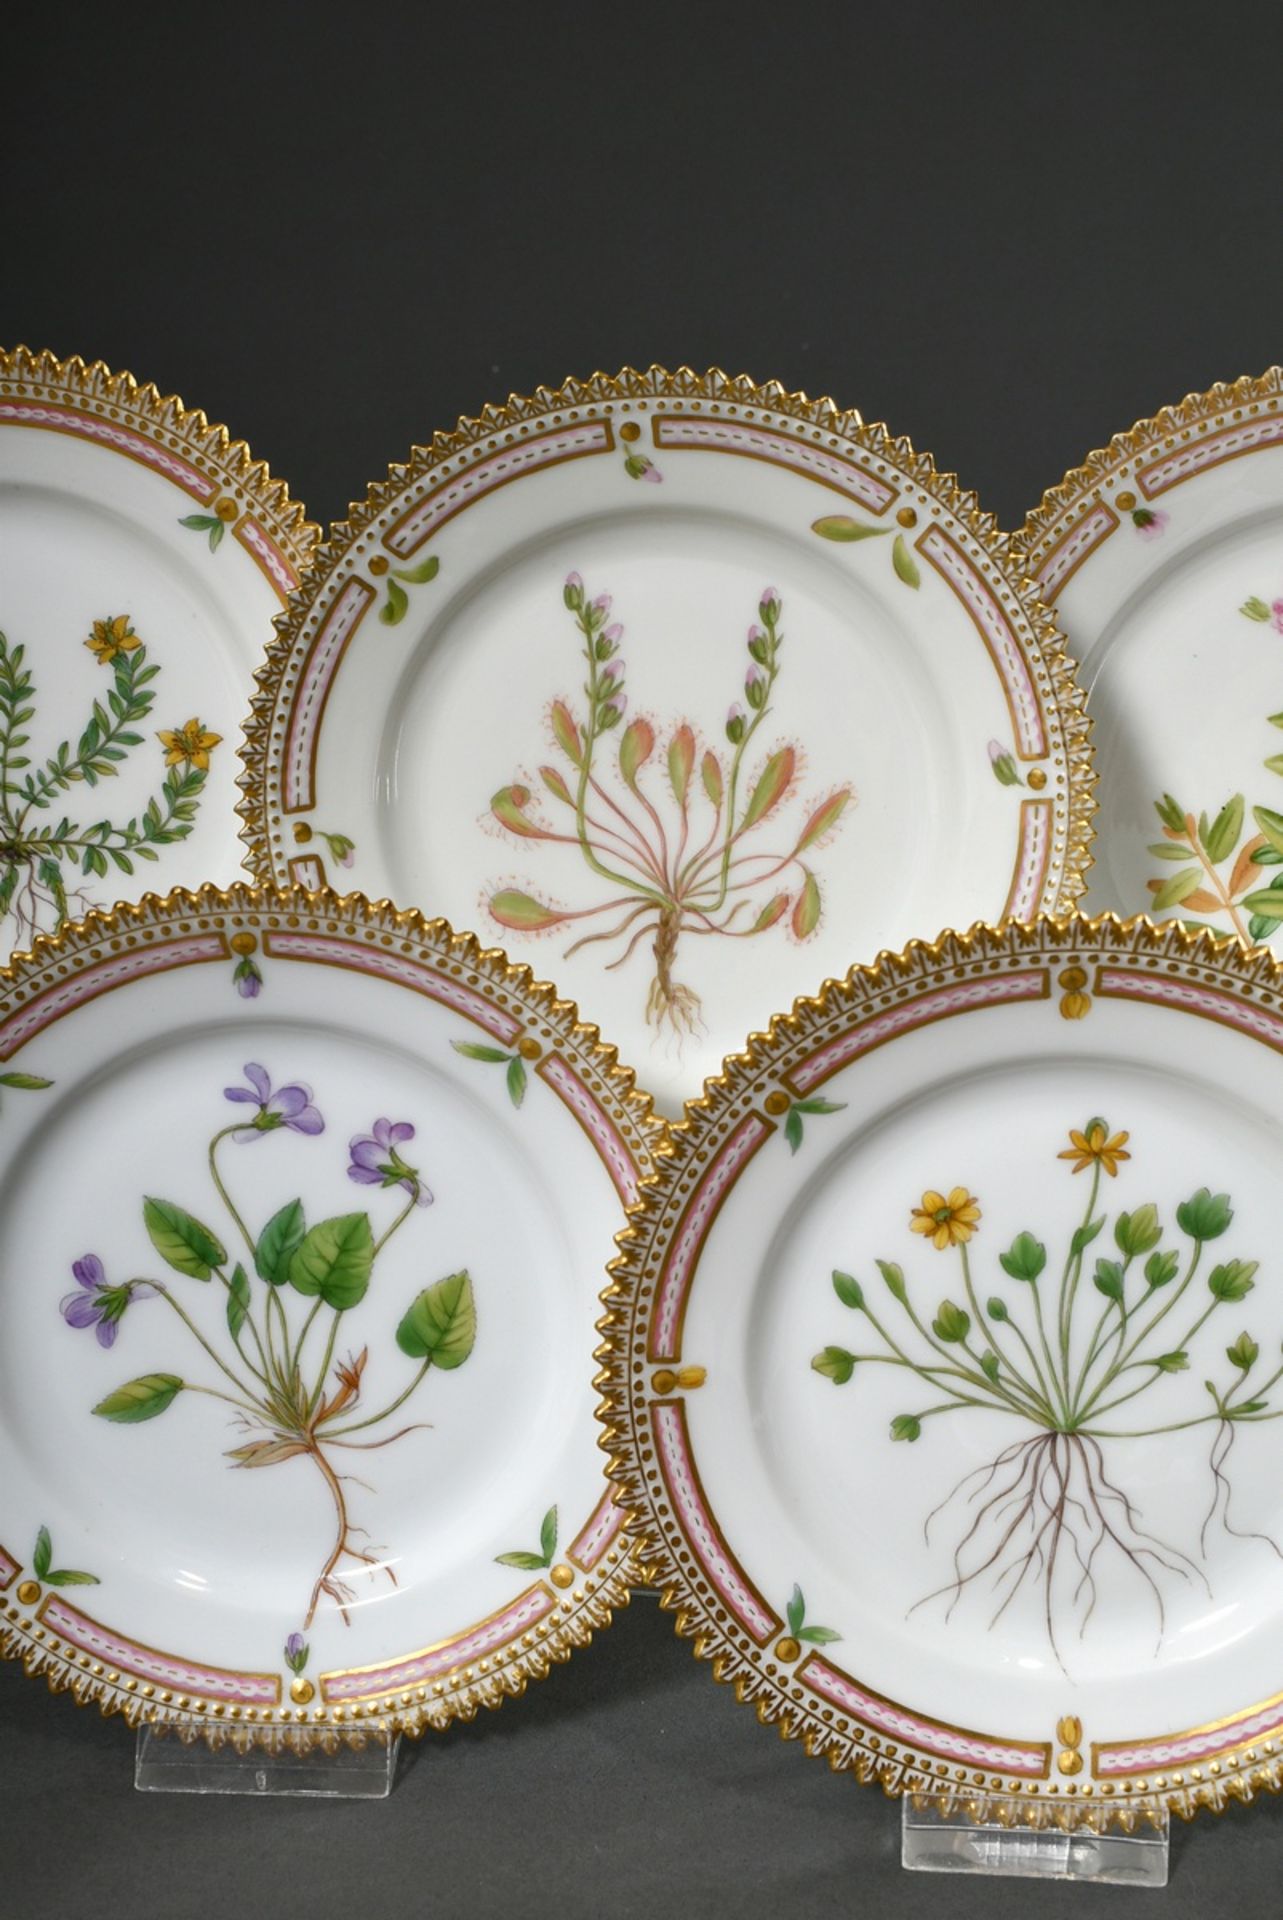 7 Royal Copenhagen "Flora Danica" bread plate with polychrome painting in the mirror and gold decor - Image 3 of 13